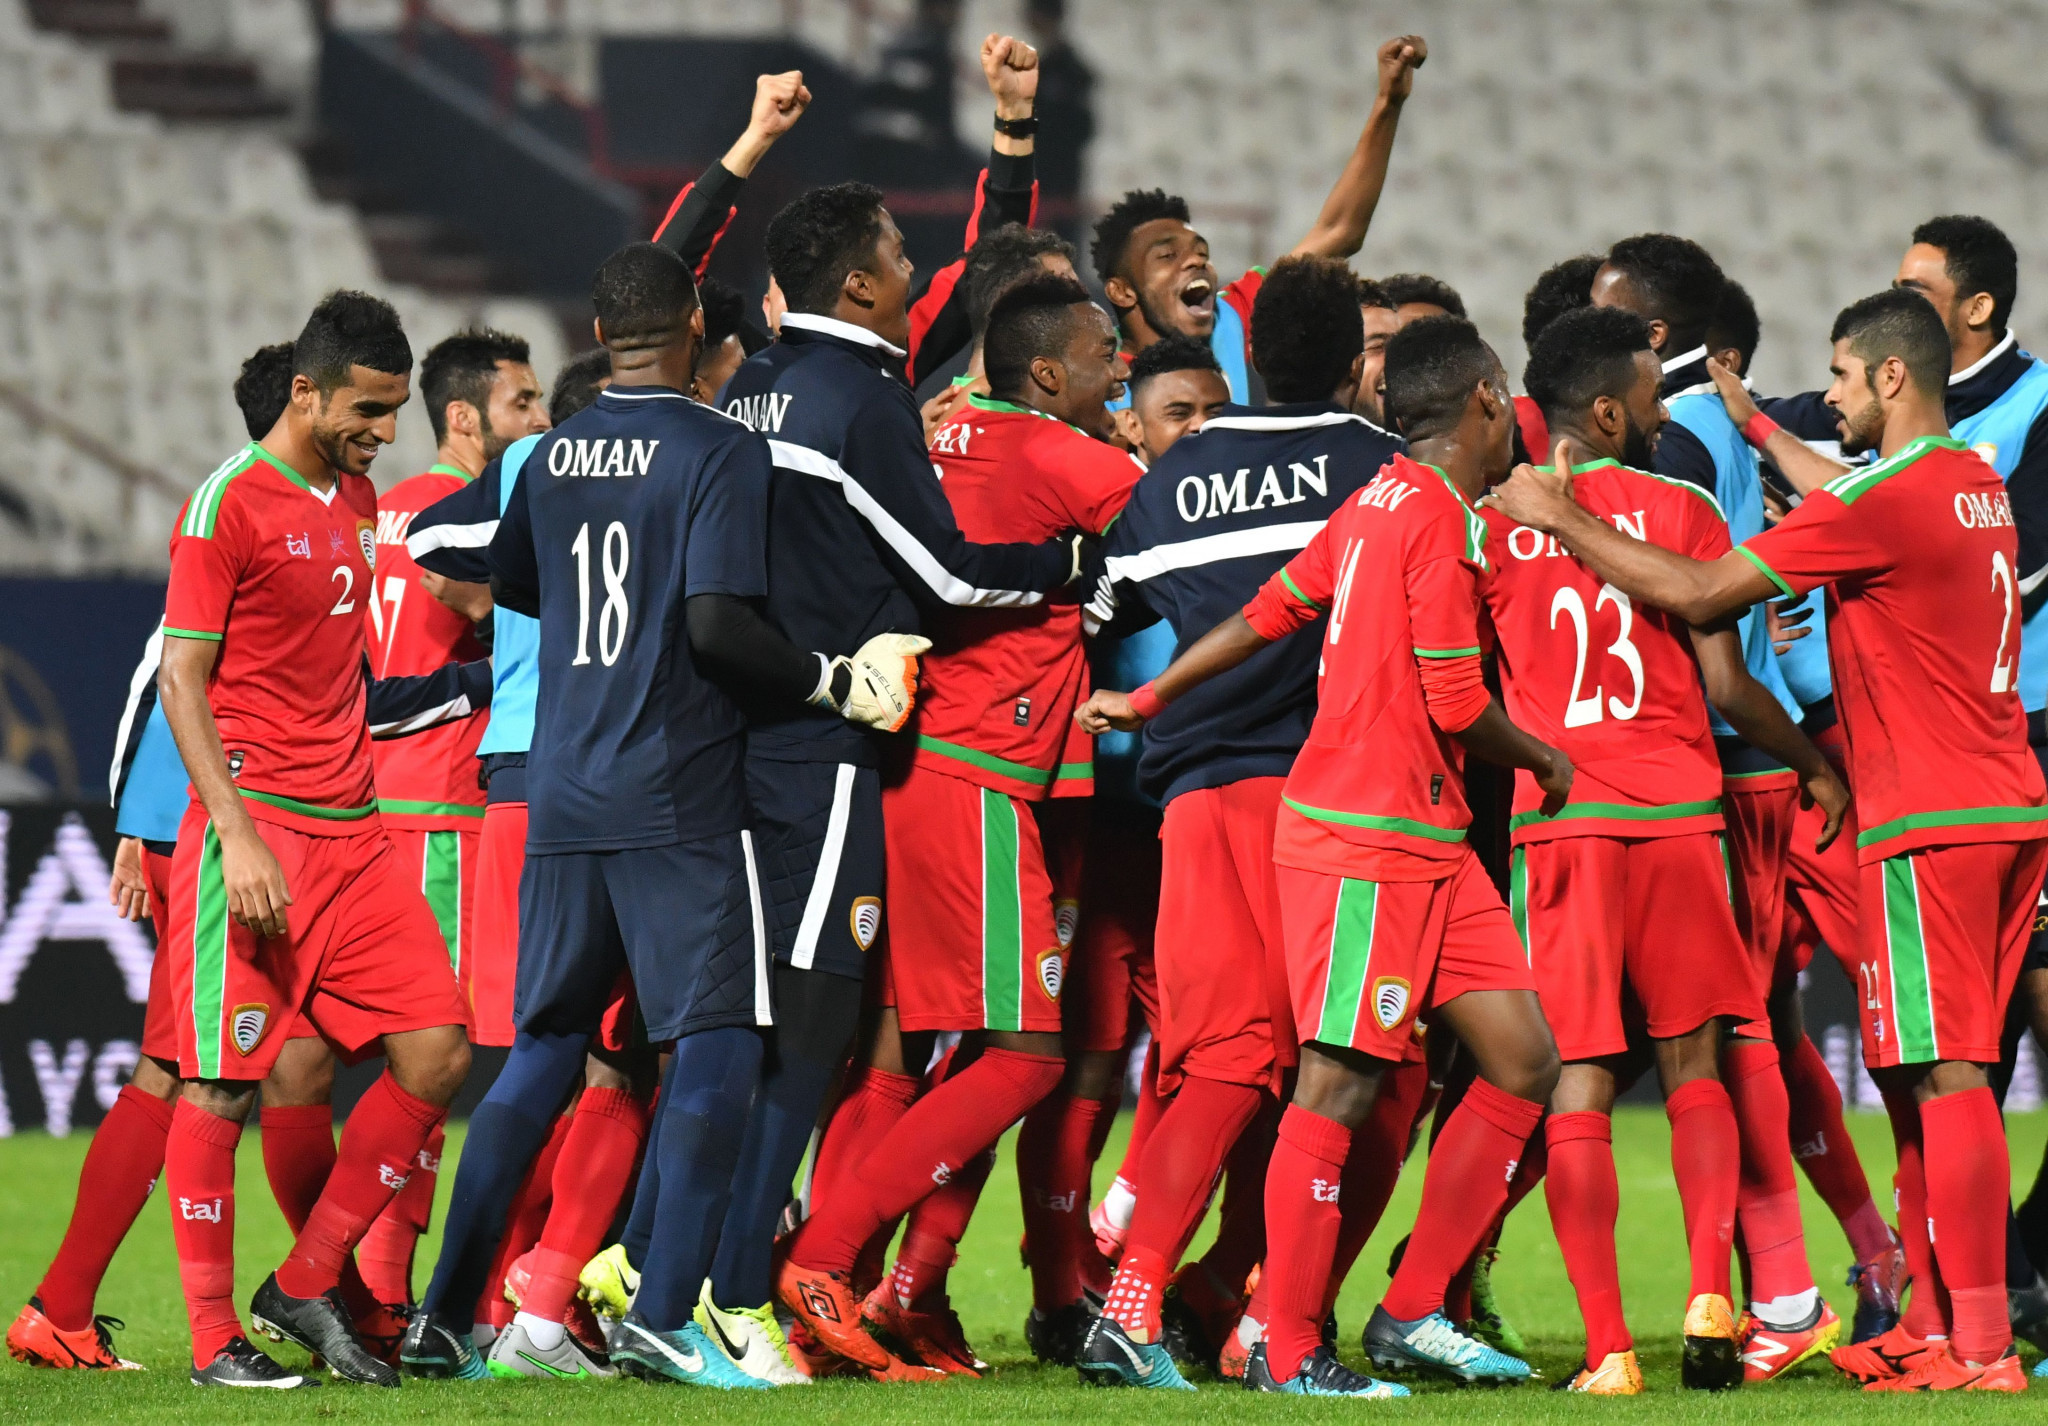 Oman celebrate after winning their crunch 2017 Gulf Cup of Nations match against Saudi Arabia at the Kuwait Stadium ©Getty Images